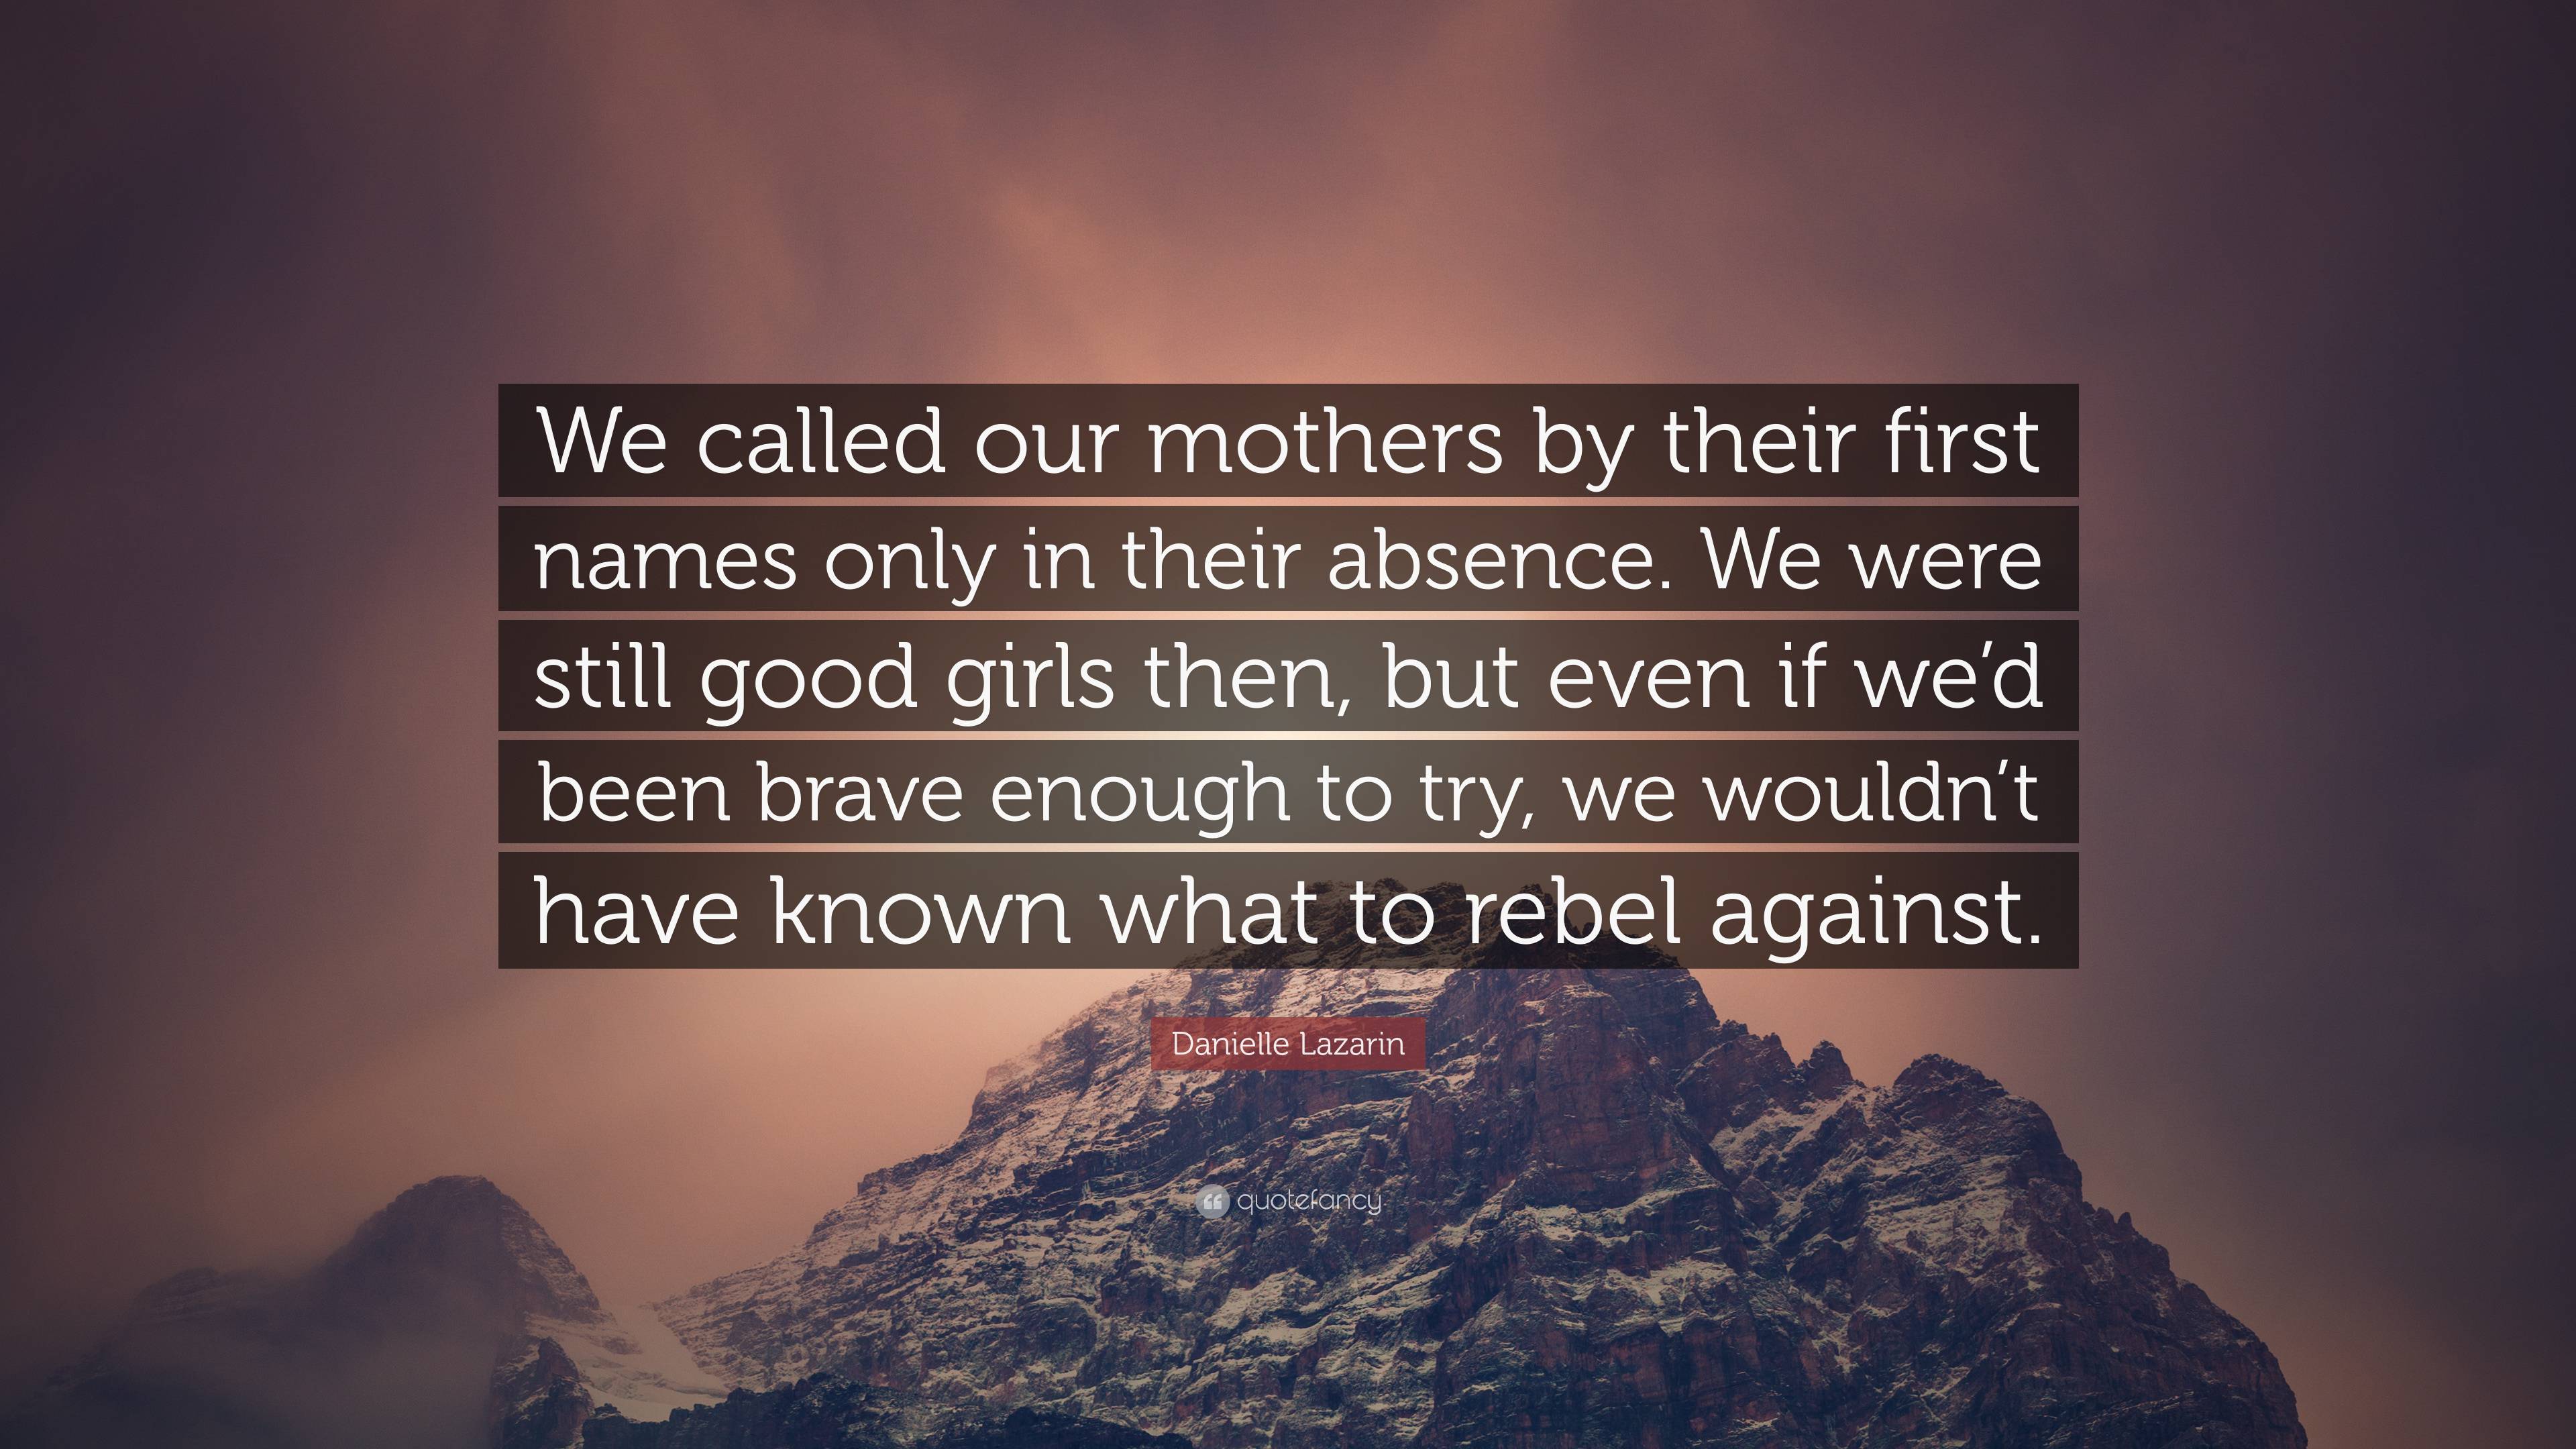 Danielle Lazarin Quote: “We called our mothers by their first names ...